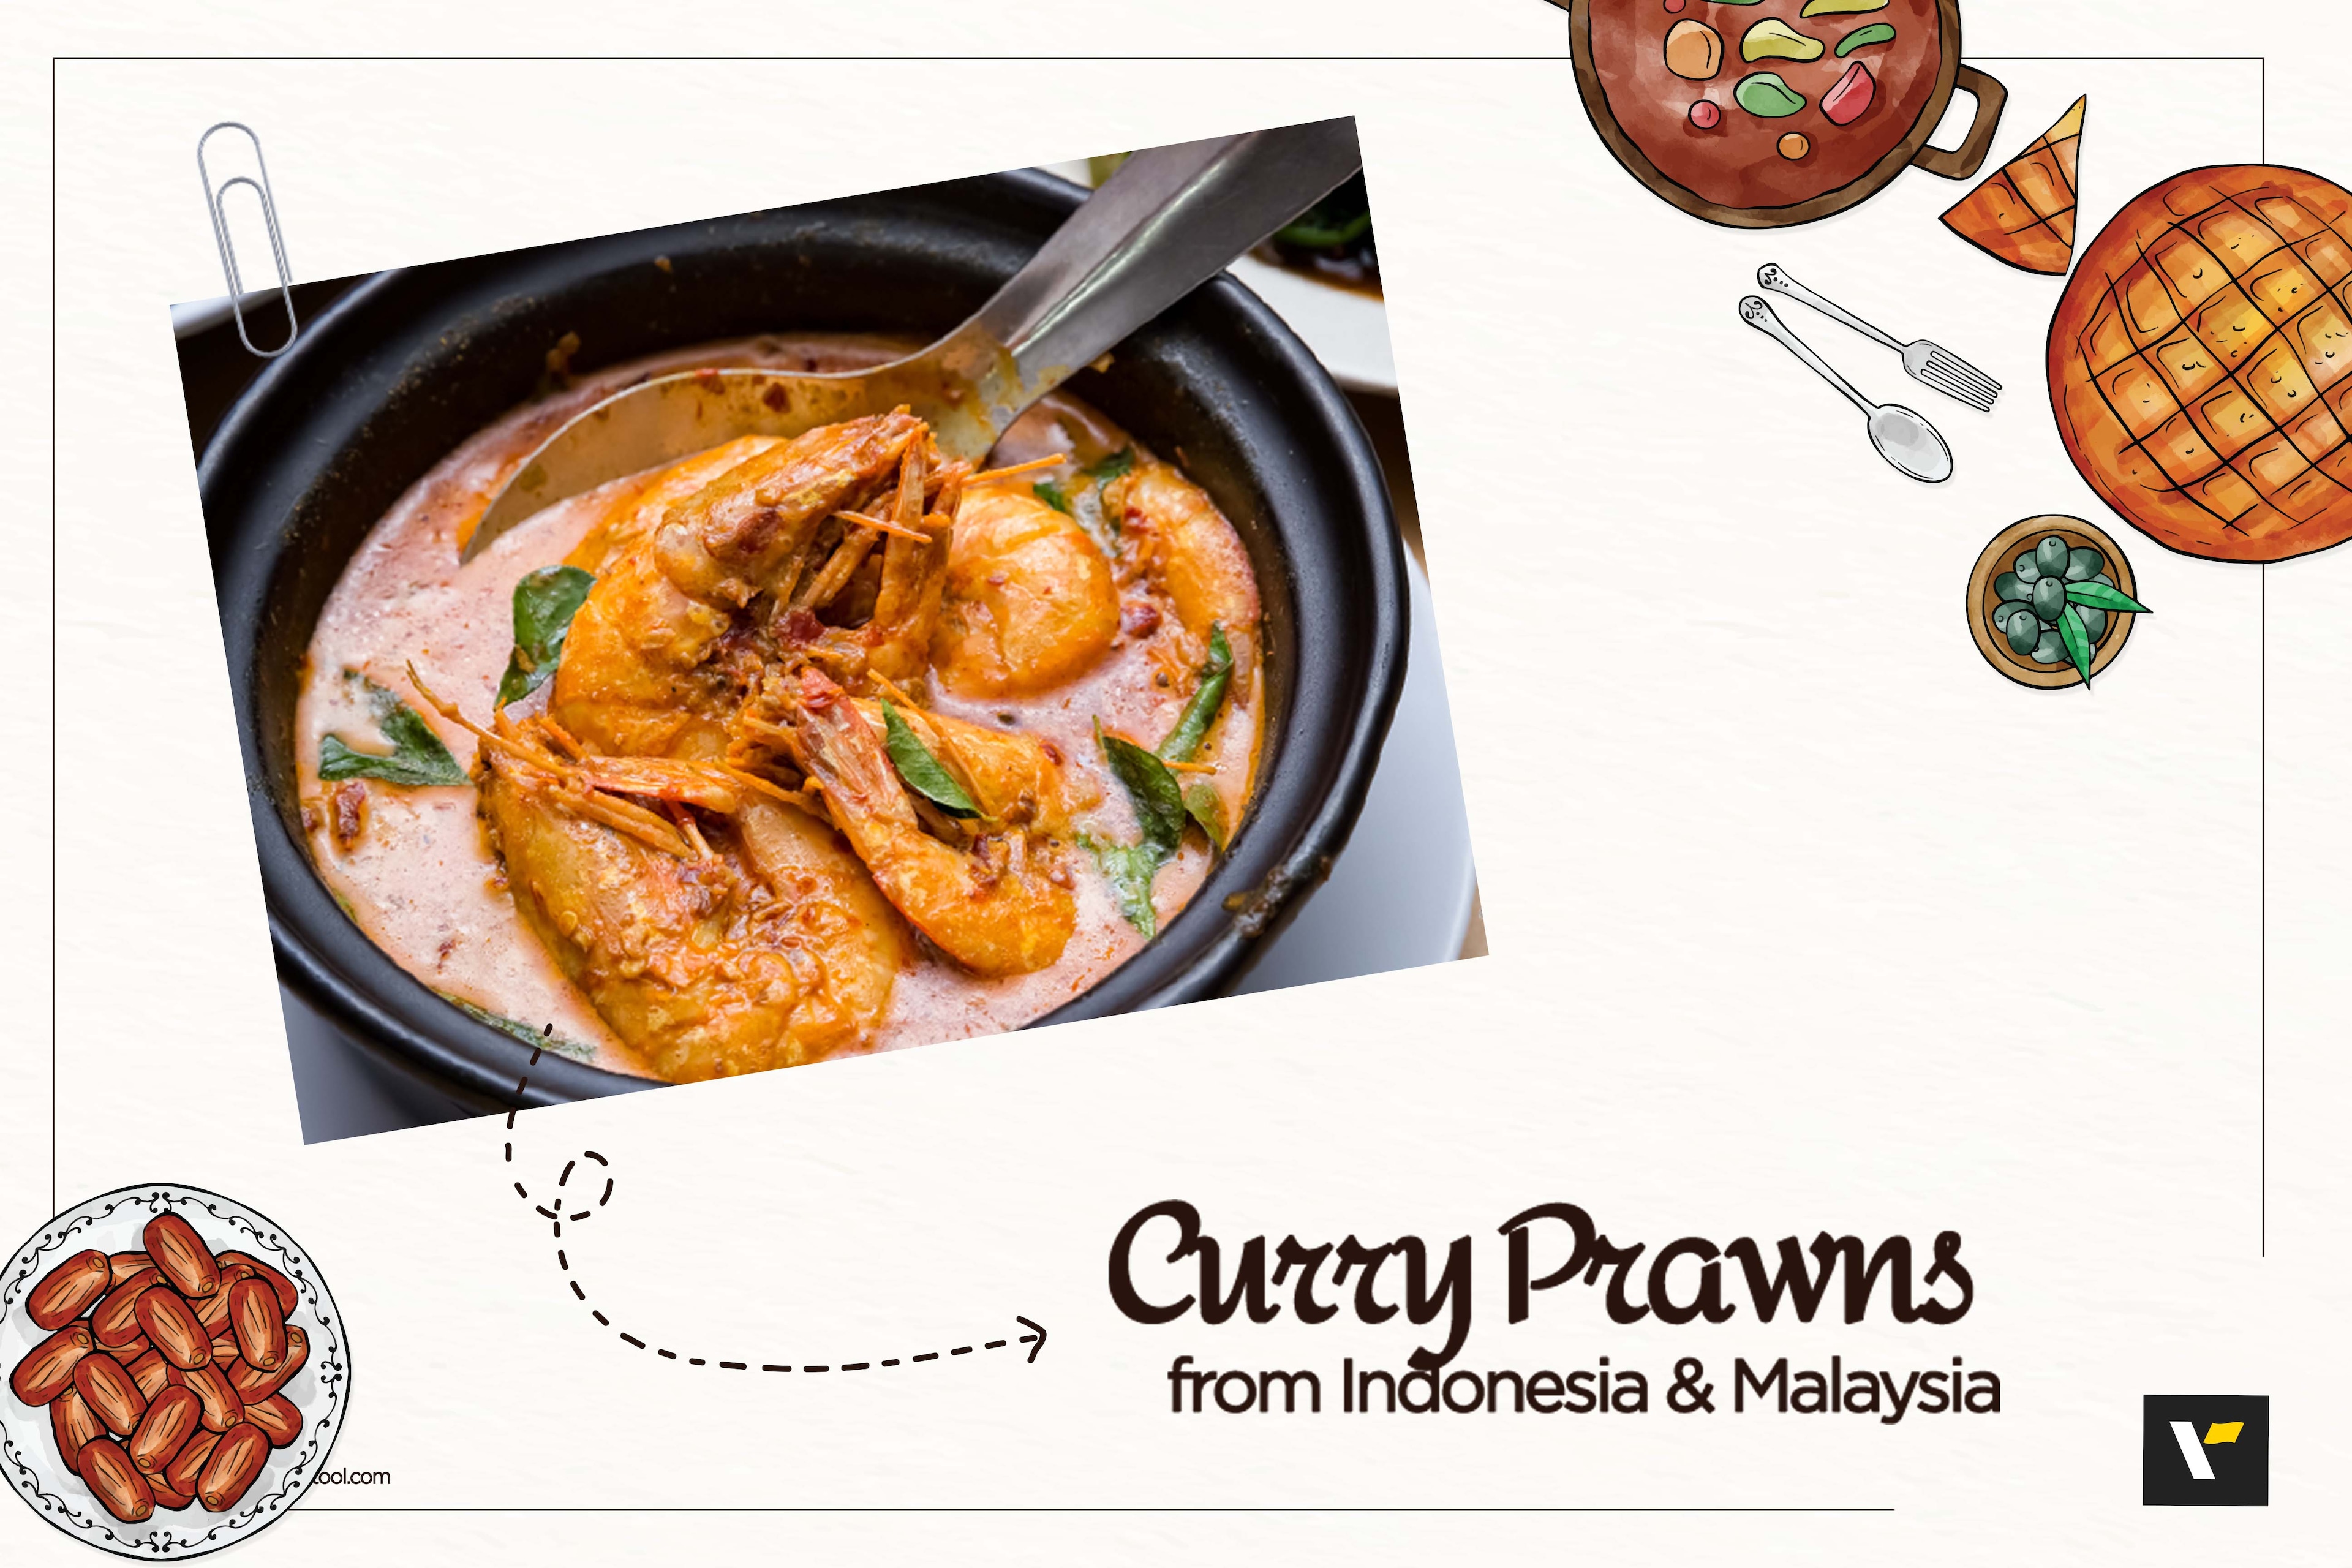 Indonesian and Malaysian Curry Prawns